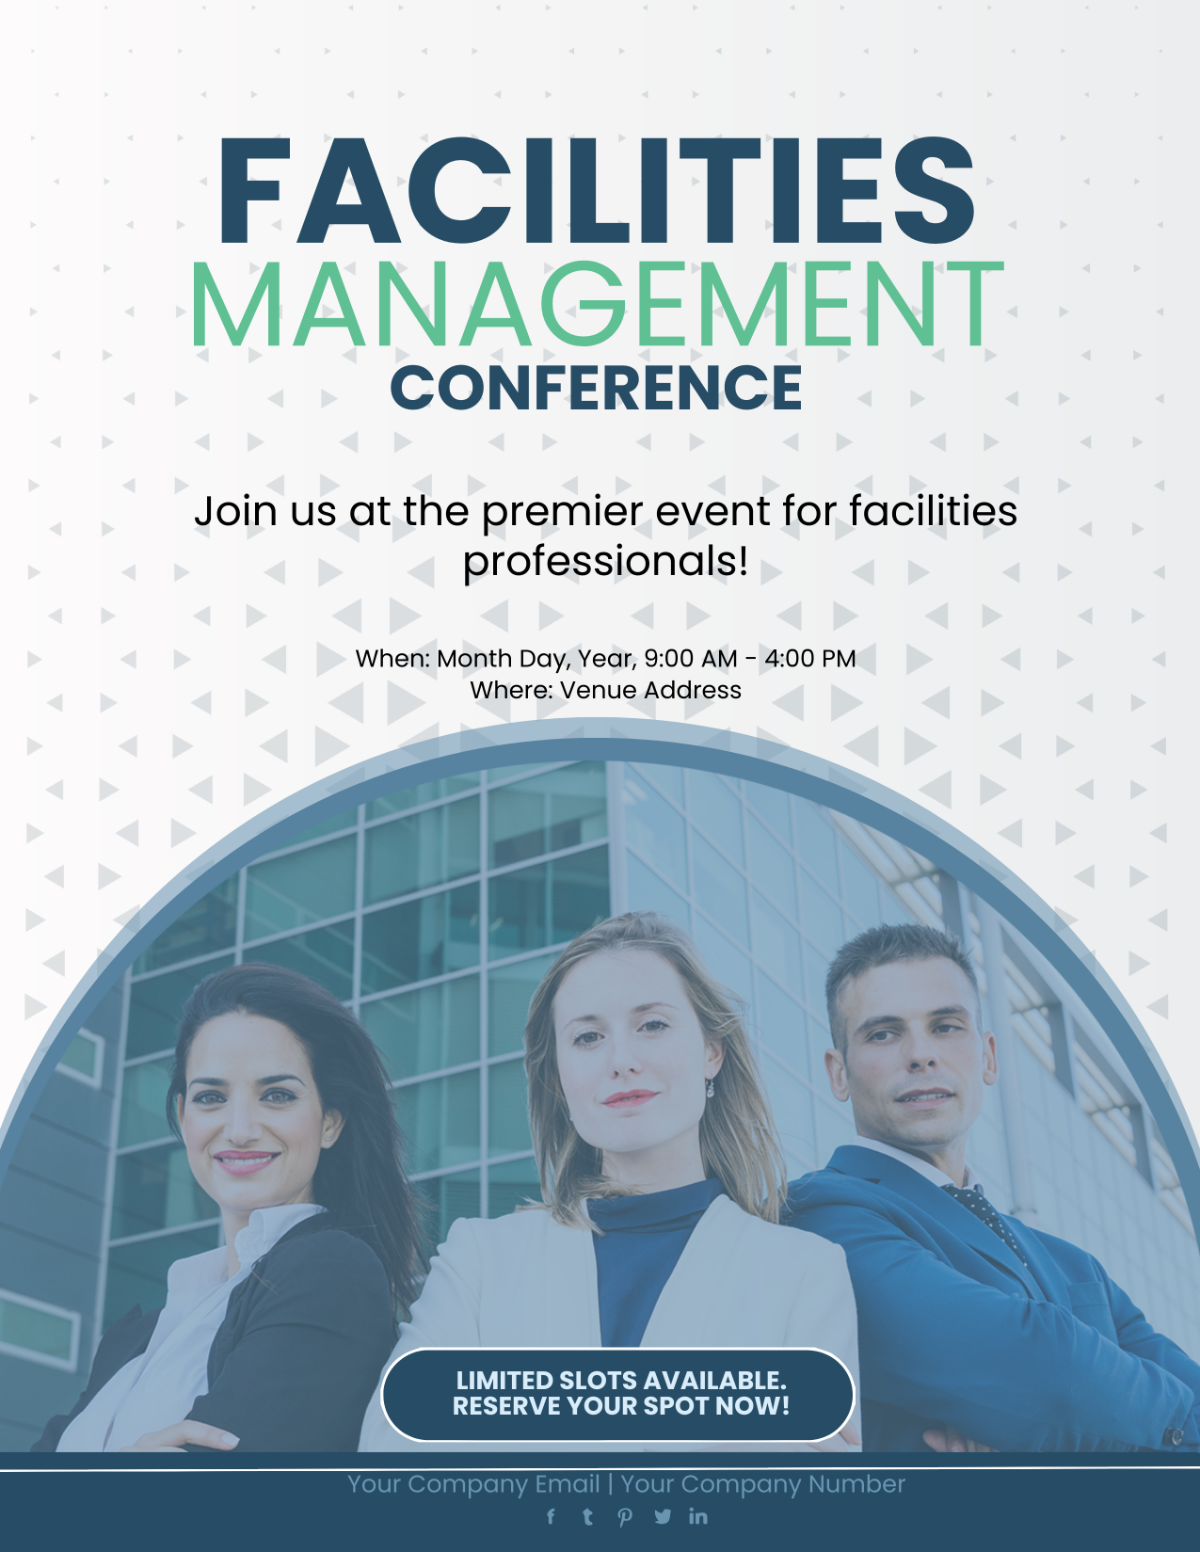 Facilities Management Conference Flyer